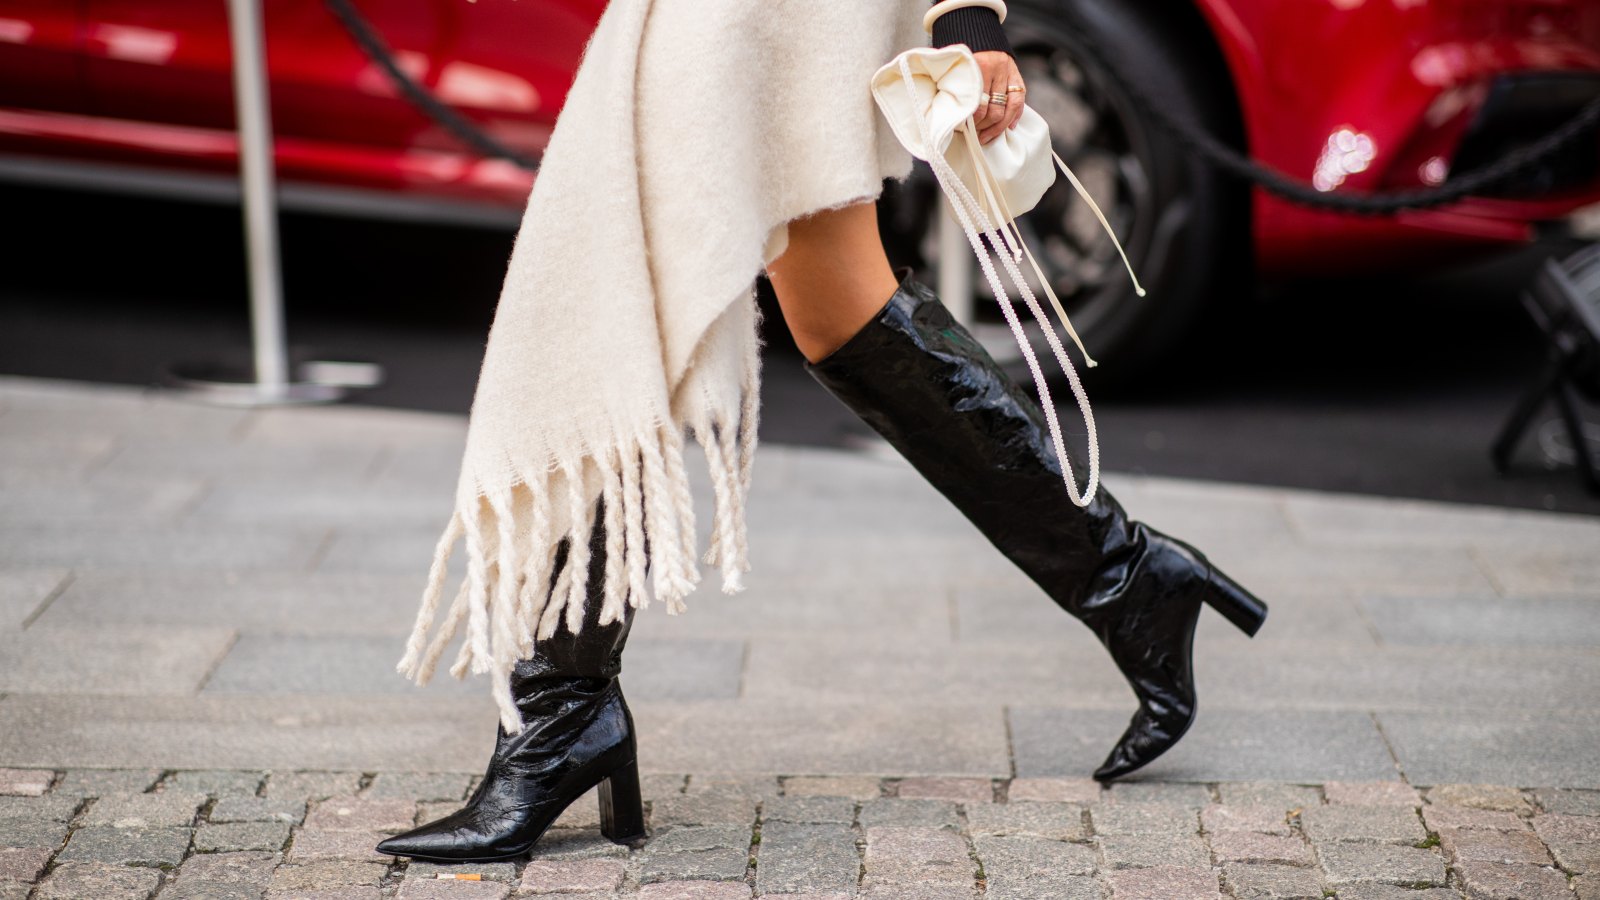 Nordstrom Sale: Shop These Knee-High Tory Burch Boots